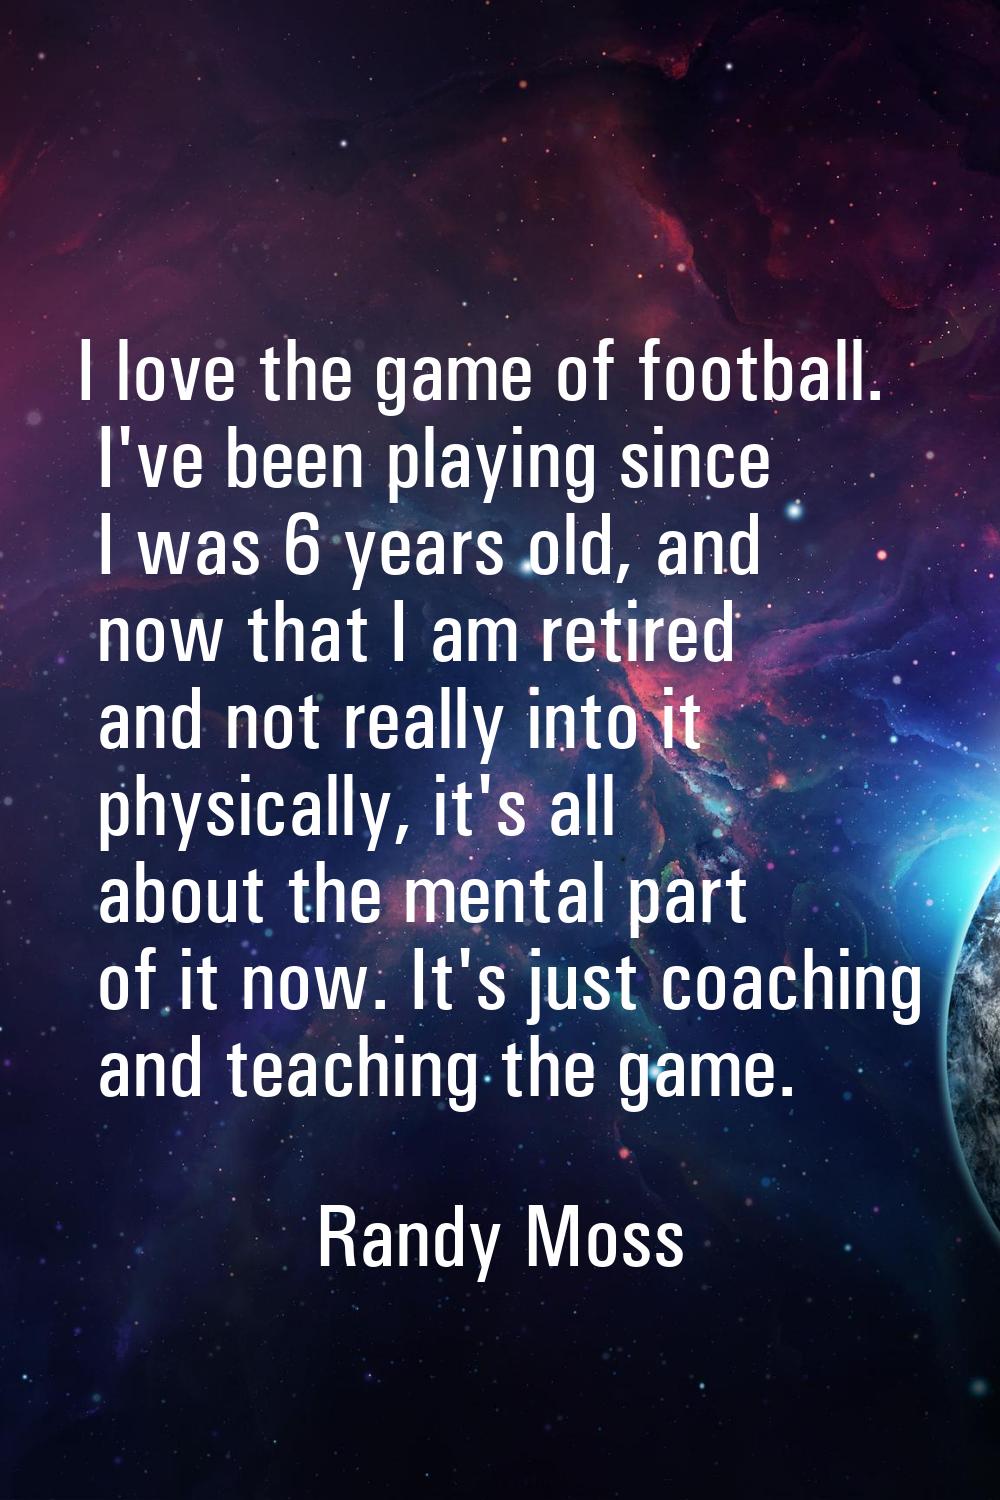 I love the game of football. I've been playing since I was 6 years old, and now that I am retired a